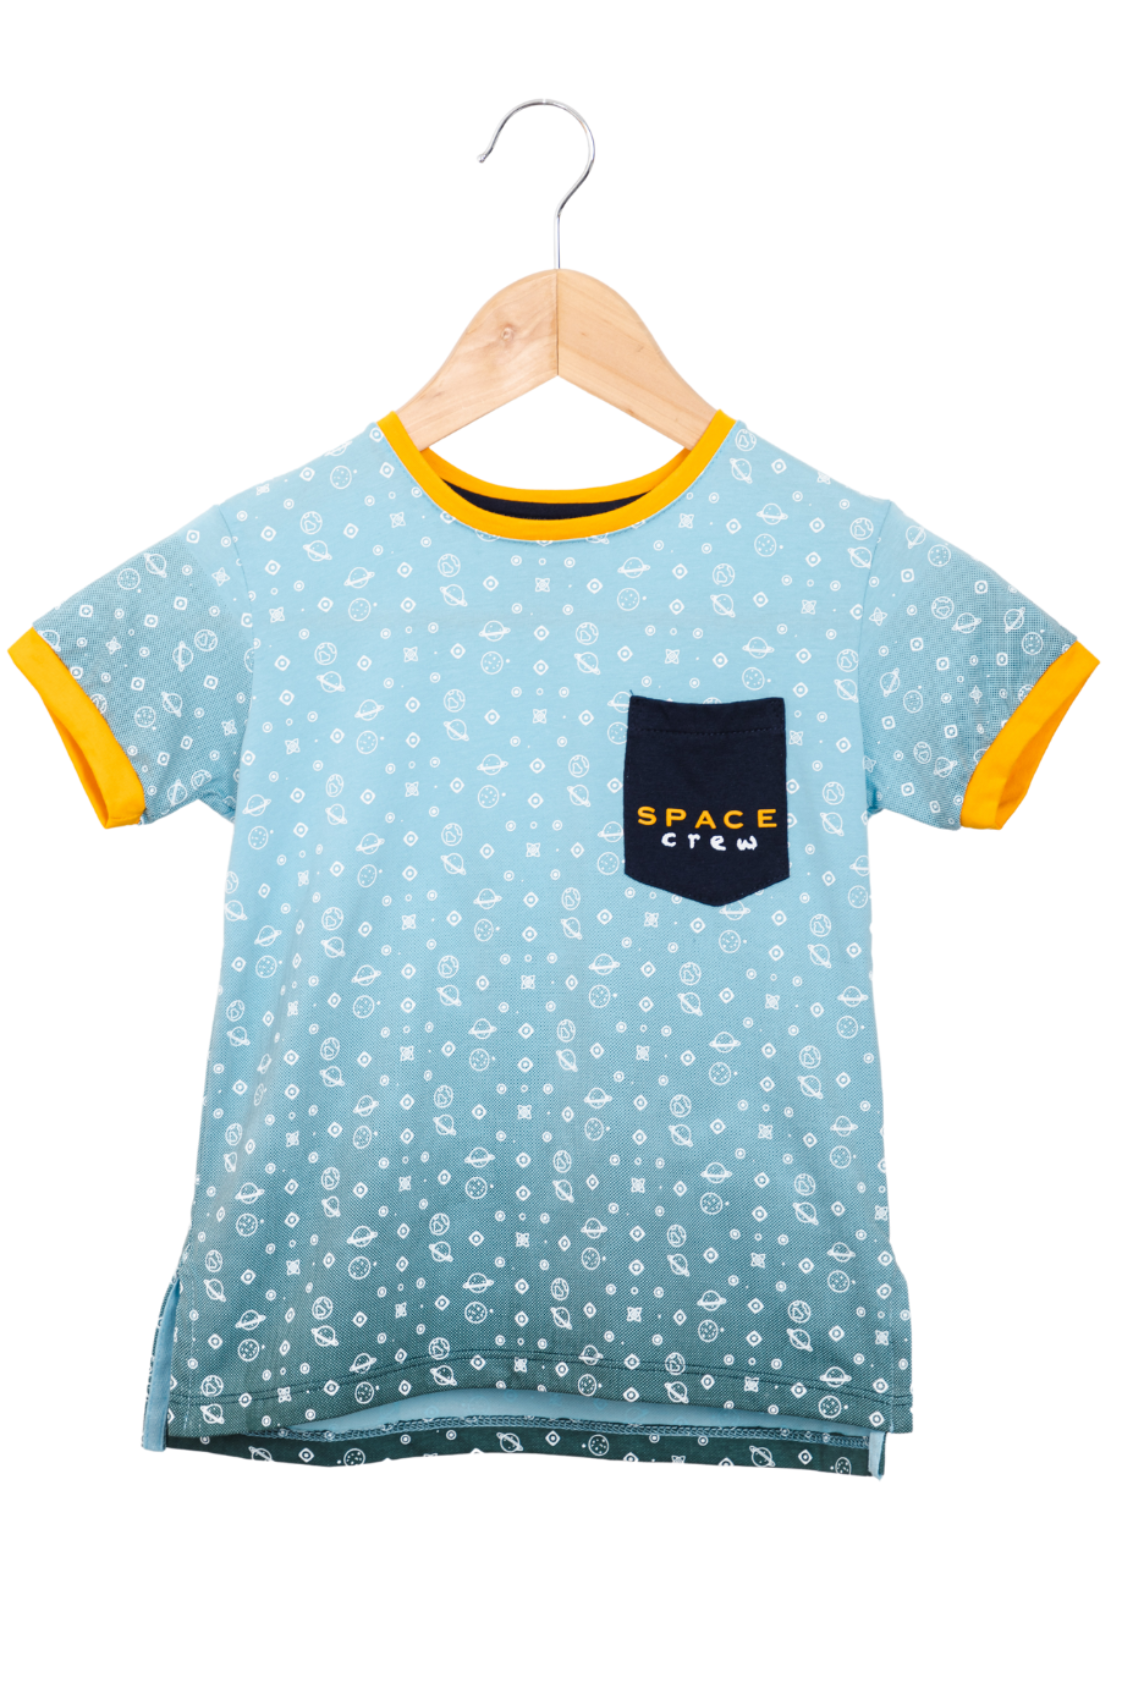 Space theme T-shirt in fading light blue to dark, STEM and non-stereotypical designs by Prisma Kiddos